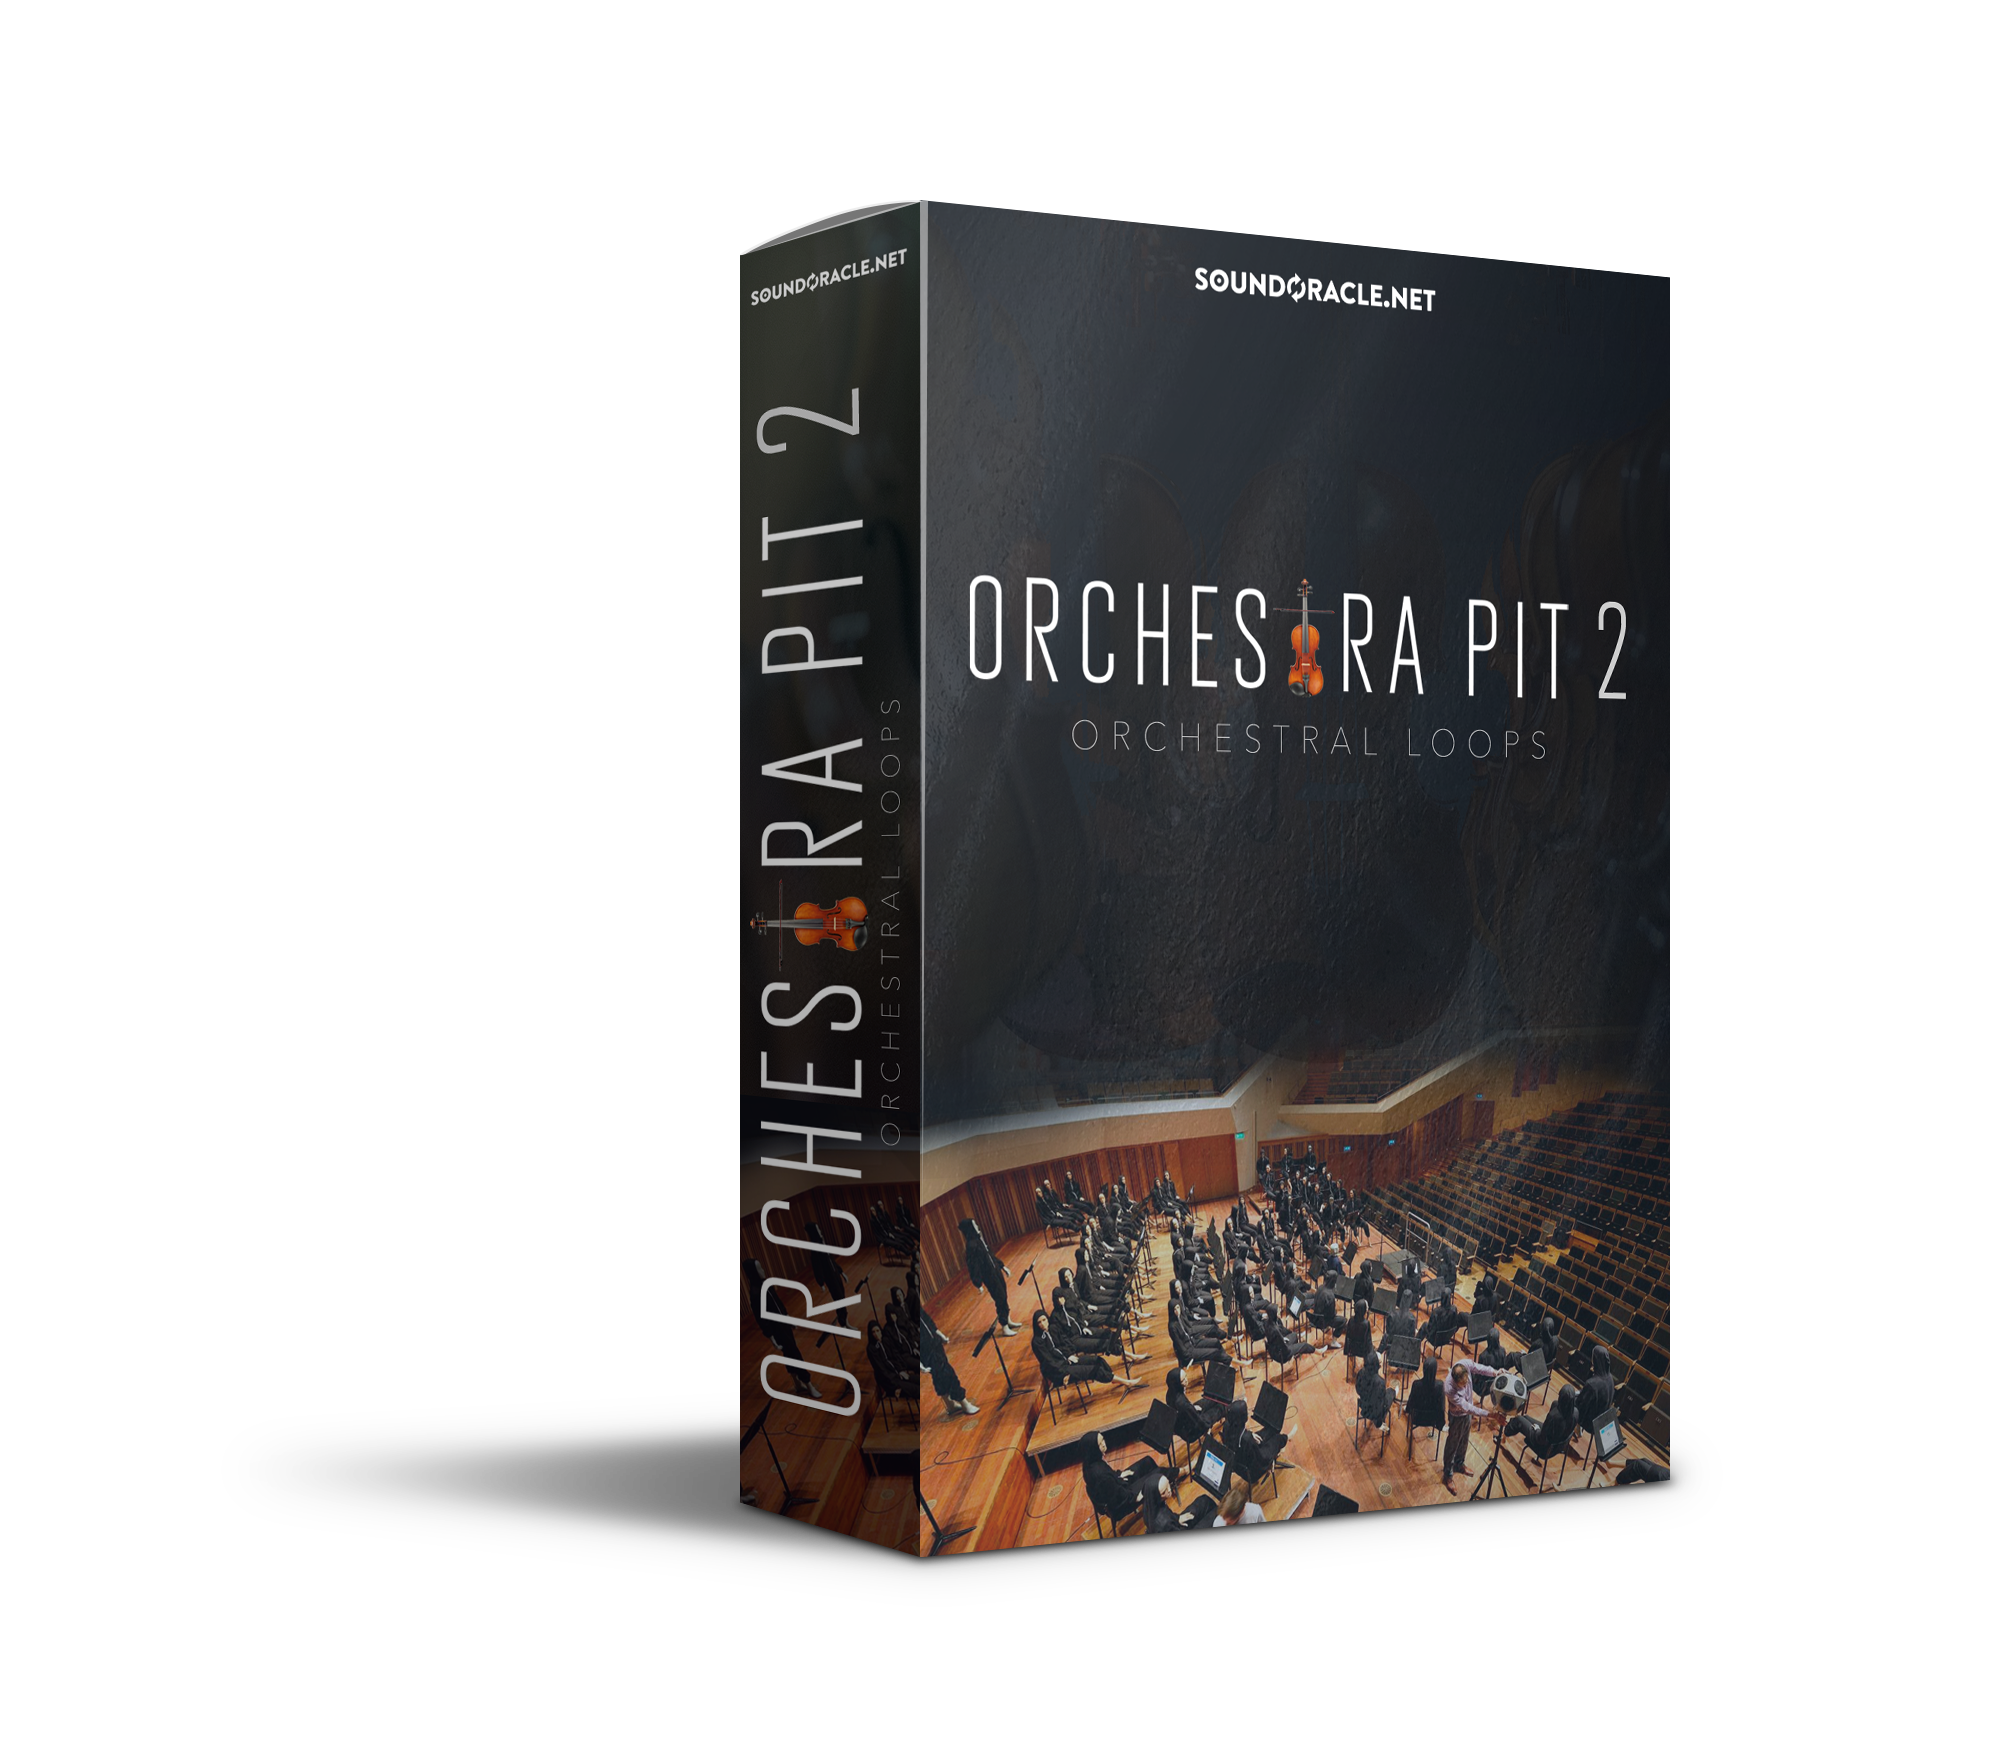 Orchestra Pit 2  Orchestral Loops